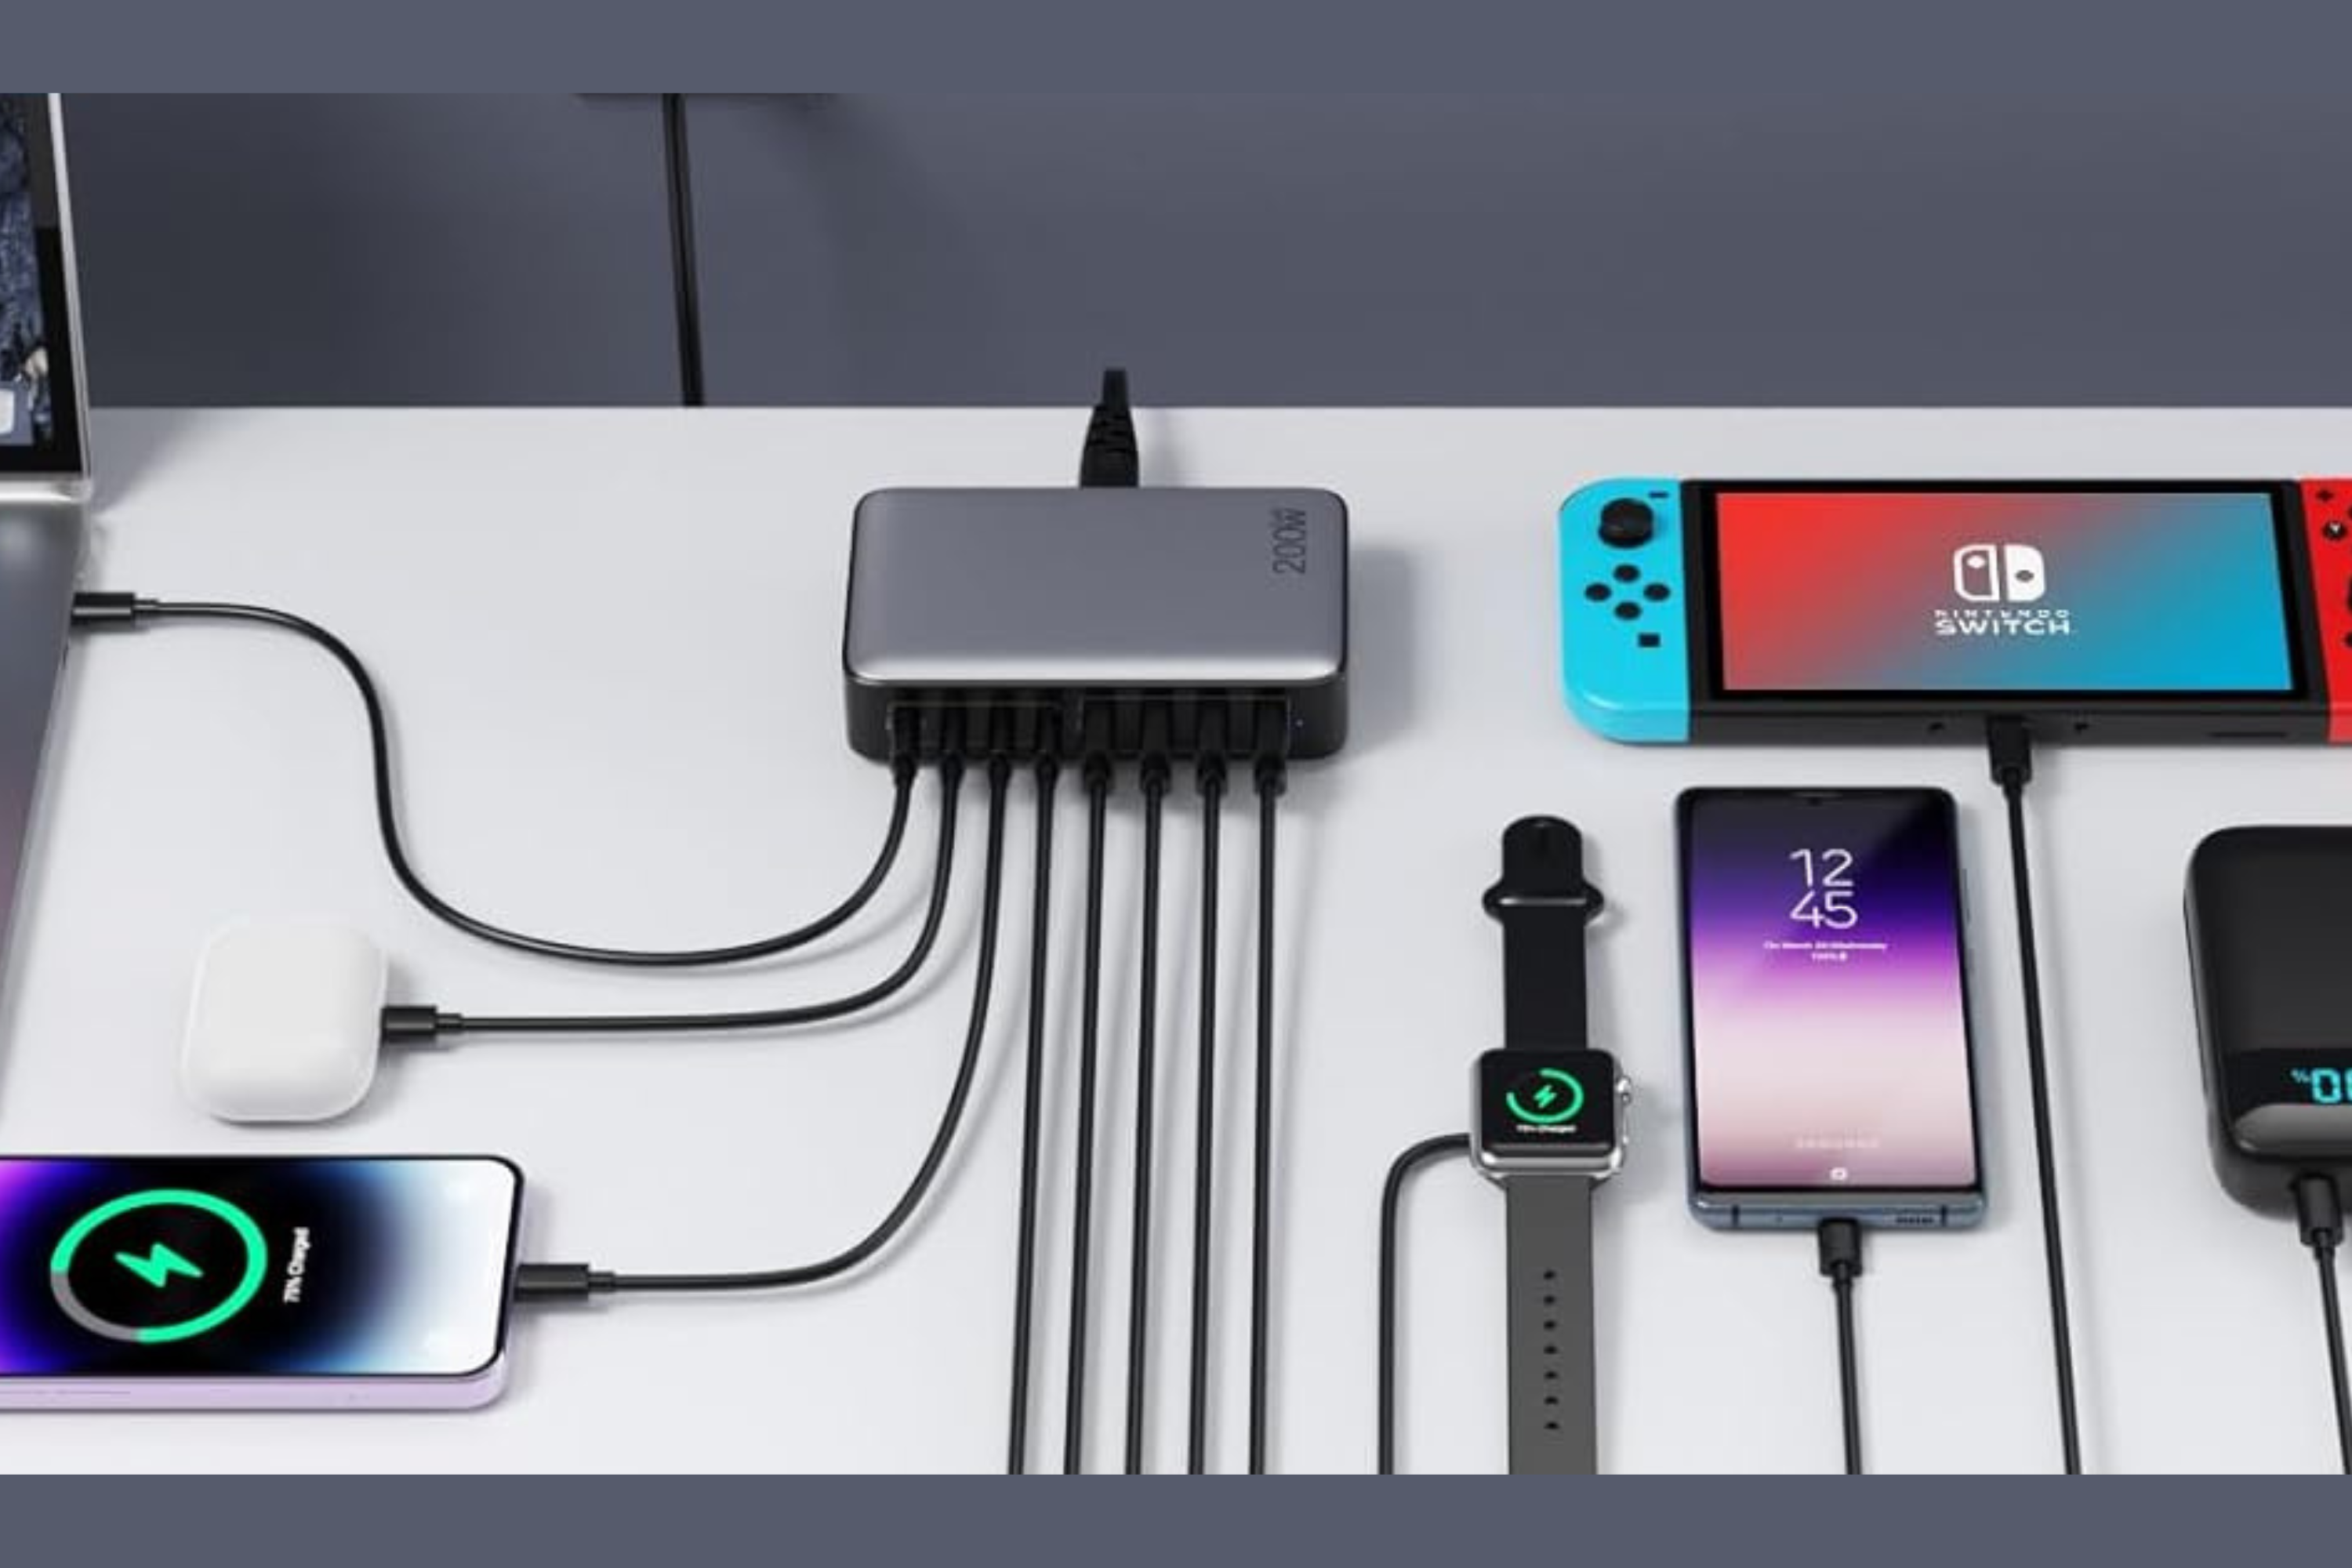 Anker 200W 8 port charging station plugged into many different devices